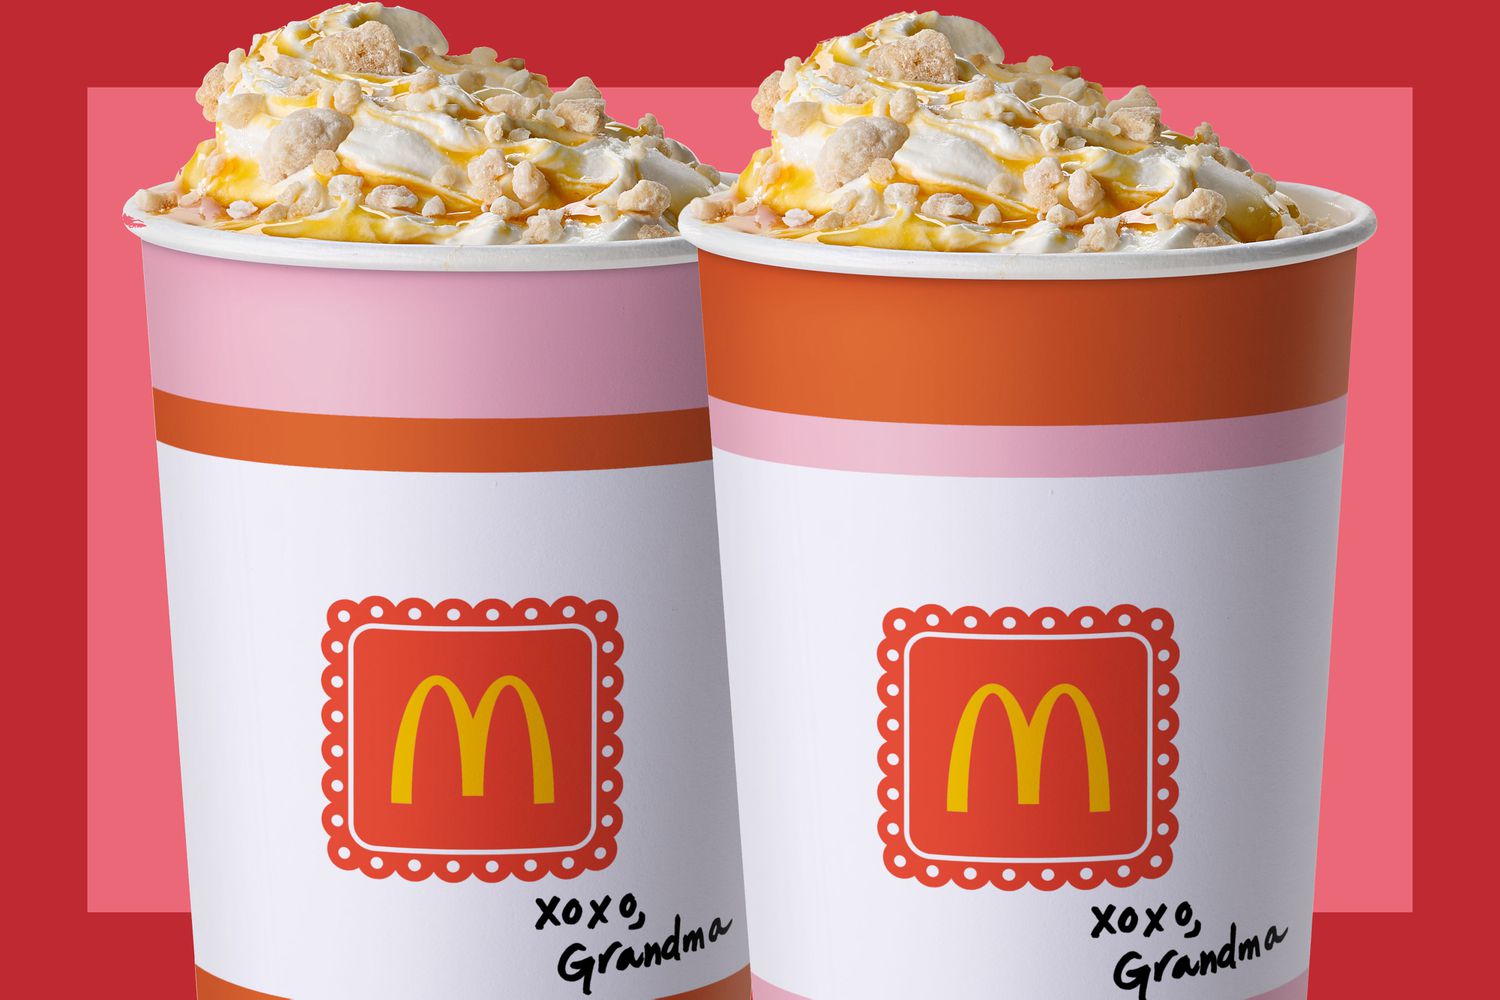 McDonald’s Introduces the New Grandma McFlurry and the McFlurry Mobile [Video]